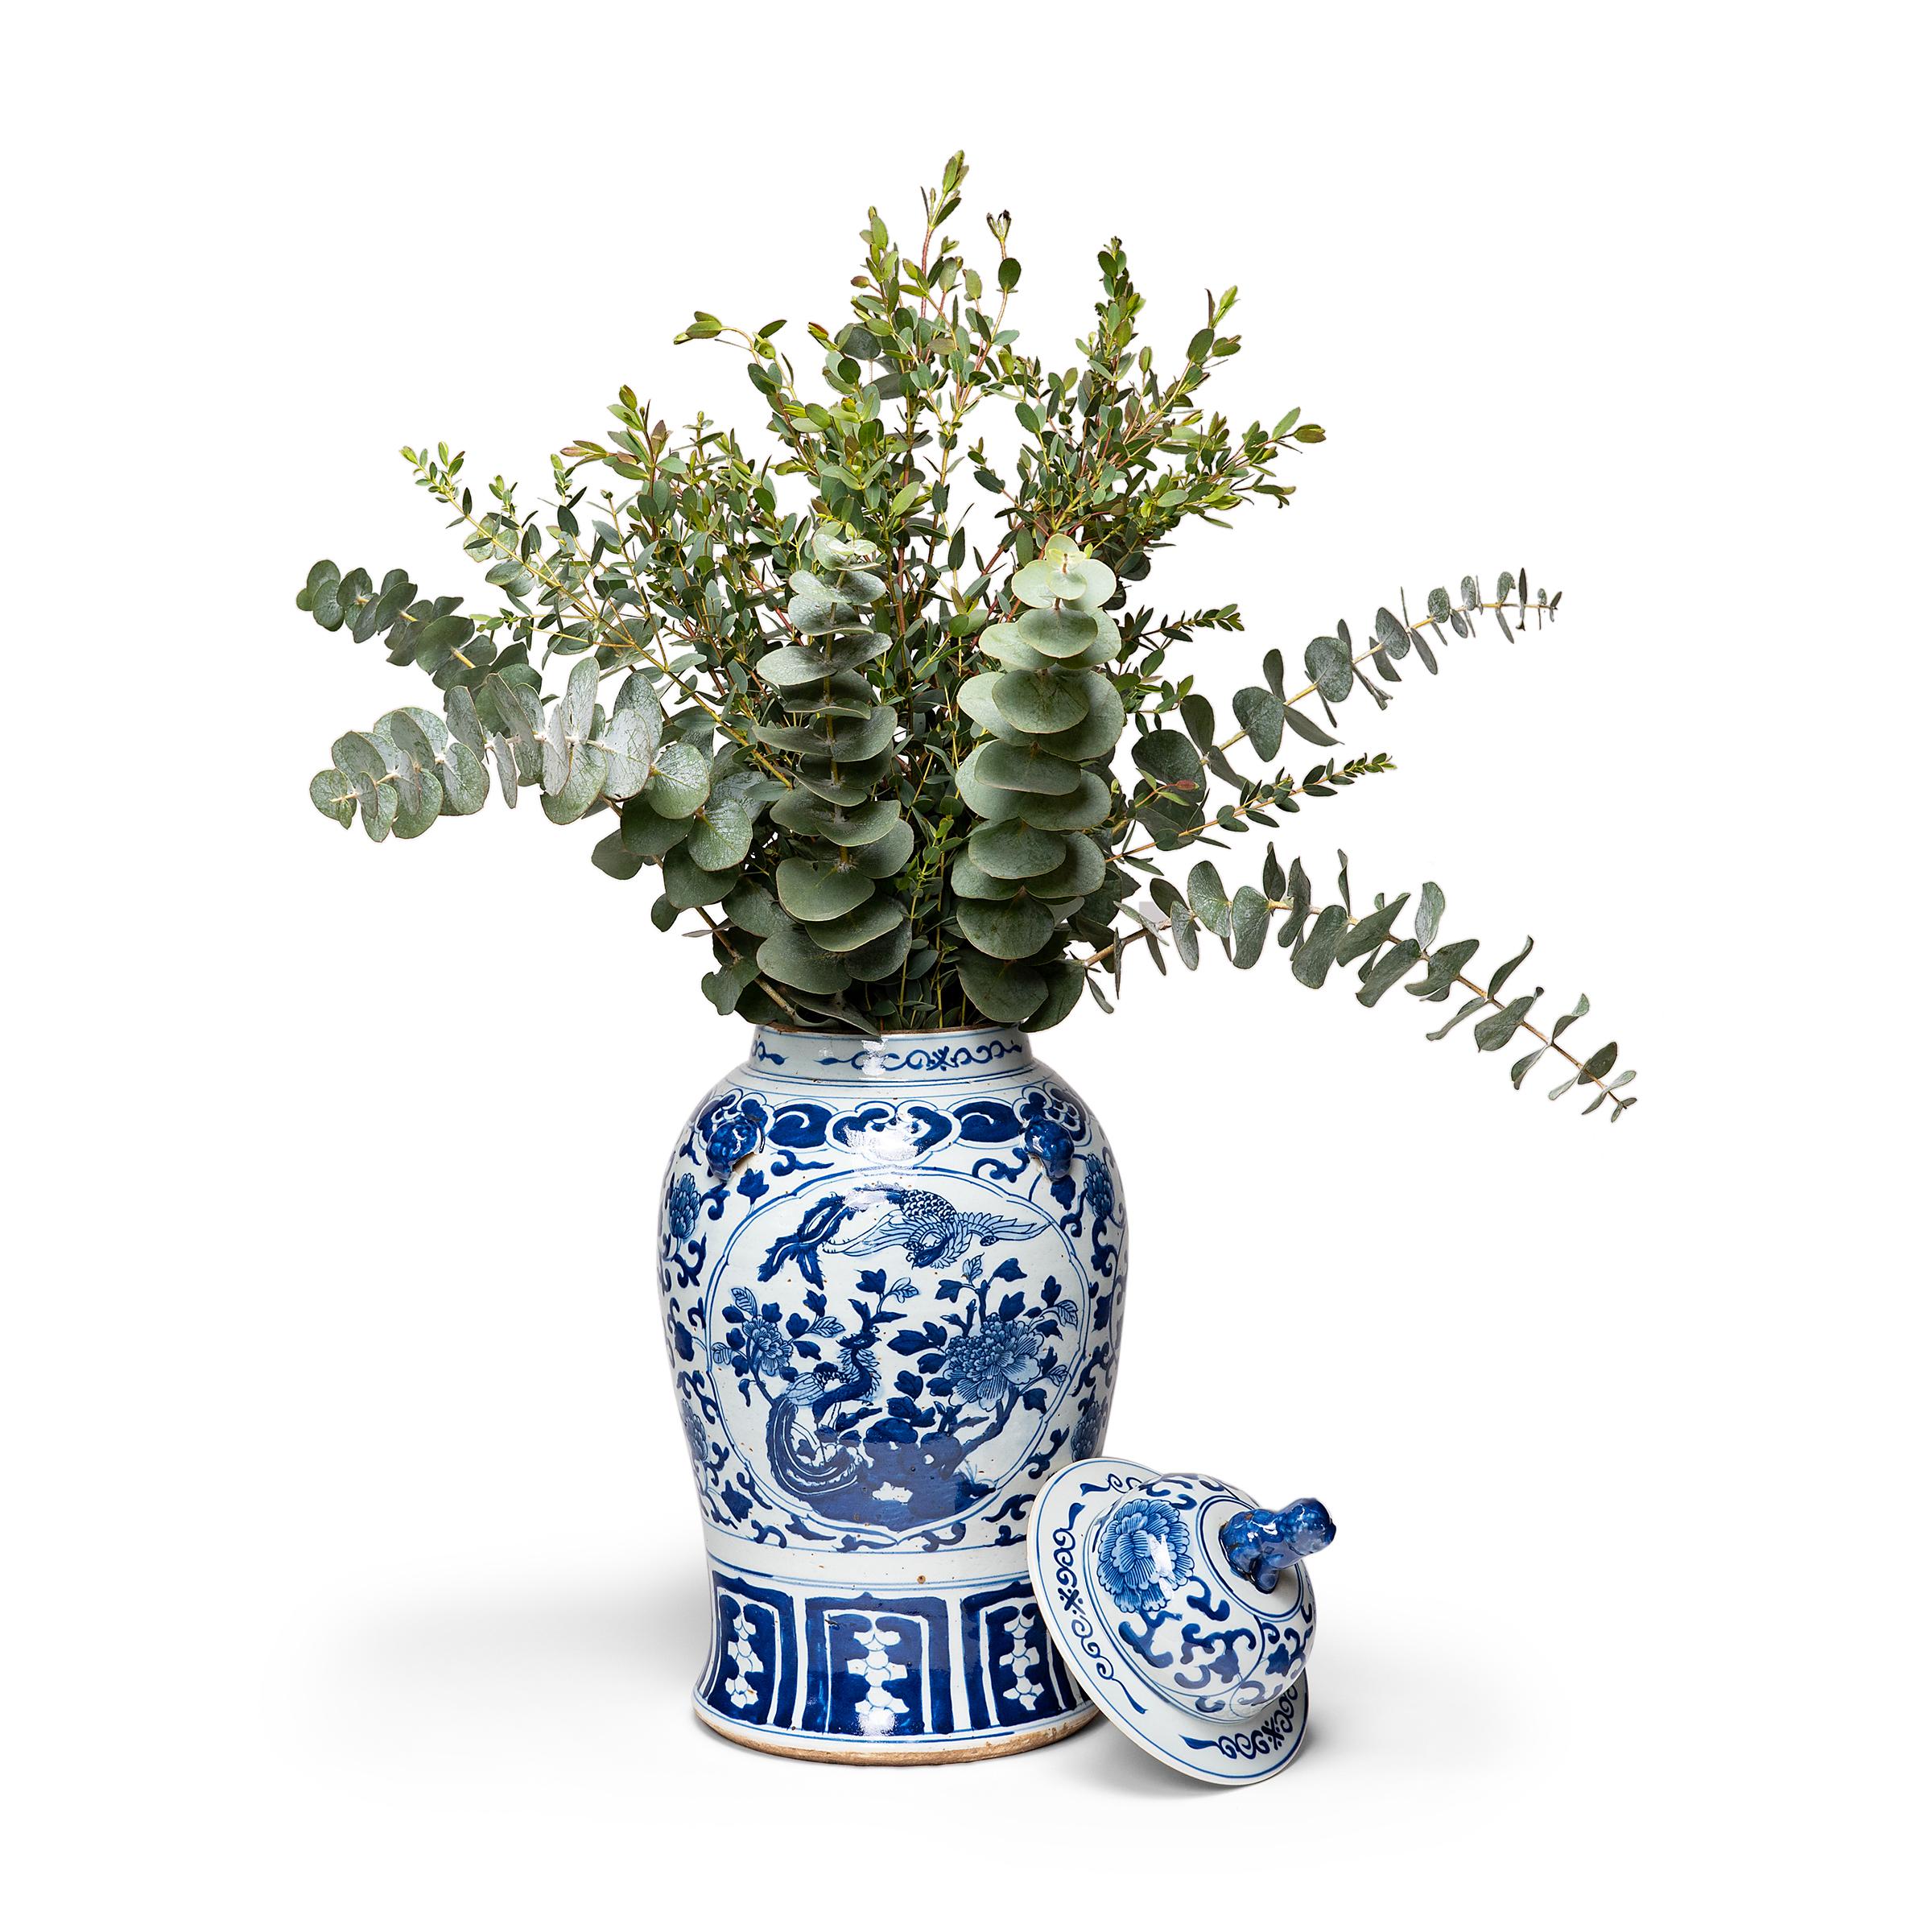 This contemporary lidded baluster jar continues the centuries-old tradition of Chinese blue-and-white porcelain ware. Painted with cobalt pigments for a brilliant blue finish, the jar is densely patterned with trailing vine scrollwork. At the center